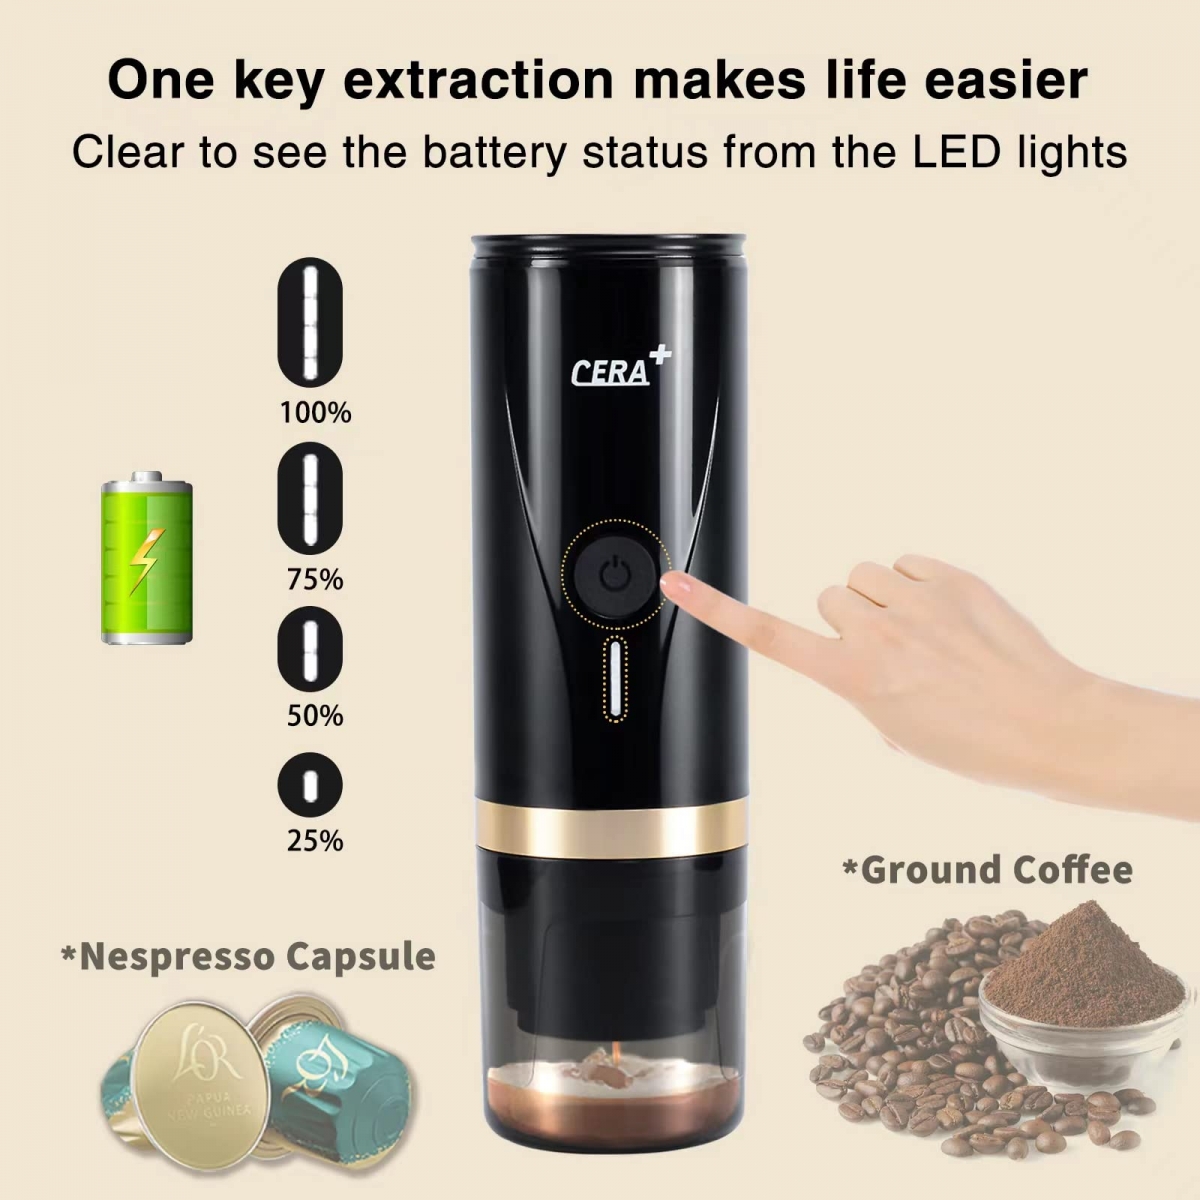 Intelligent LED indicator shows the battery level and the temperature status of the heating water.-CERA+| Portable Espresso Maker,Smart Warming Mug